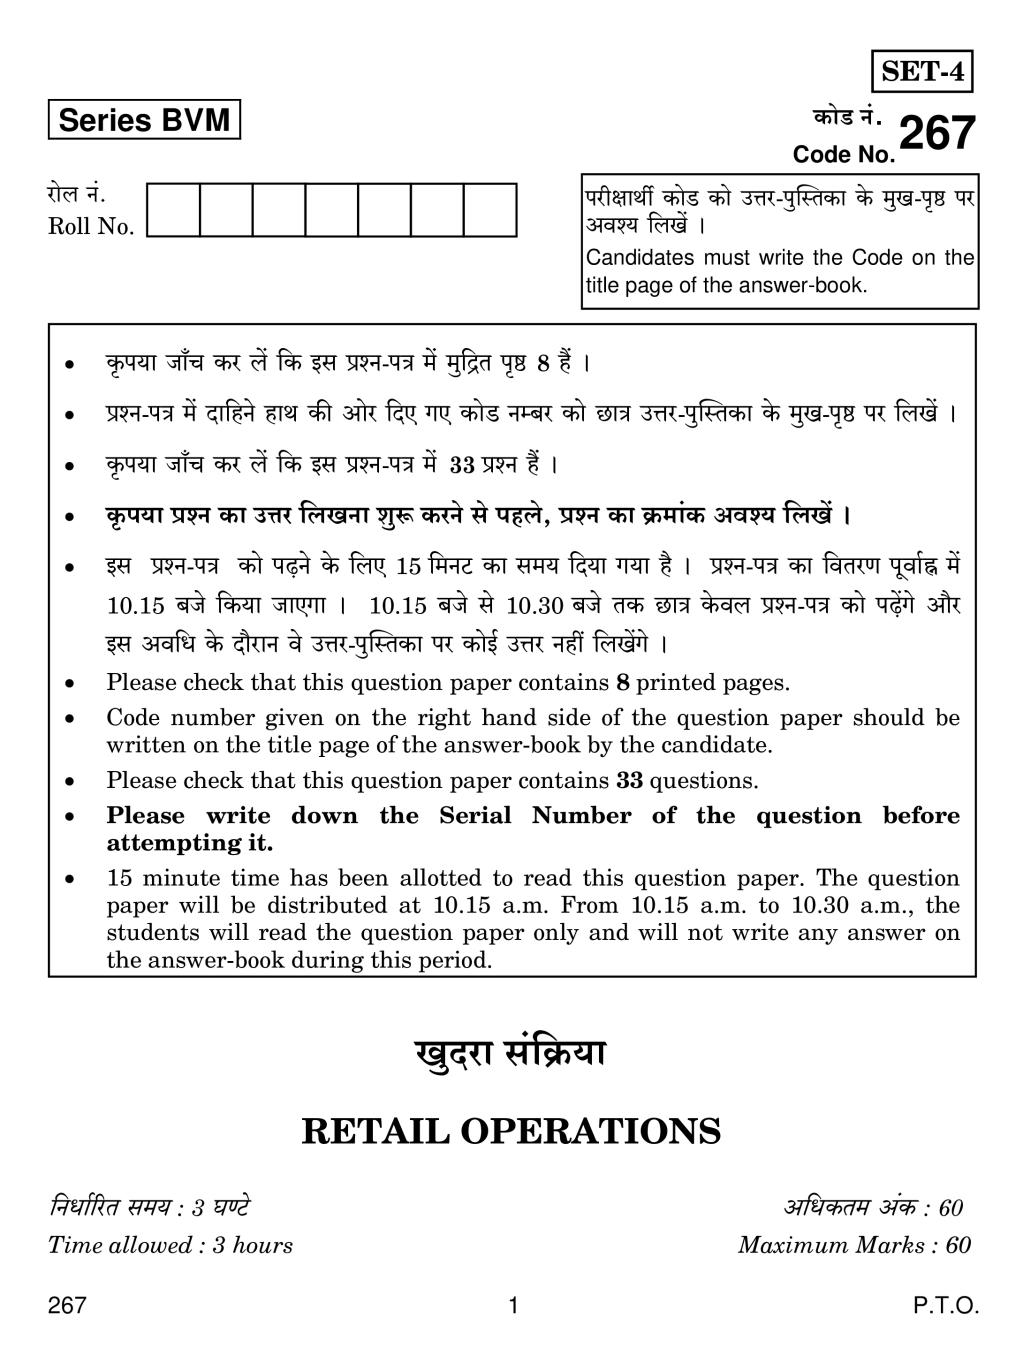 CBSE Class 12 Retail Operations Question Paper 2019 - Page 1